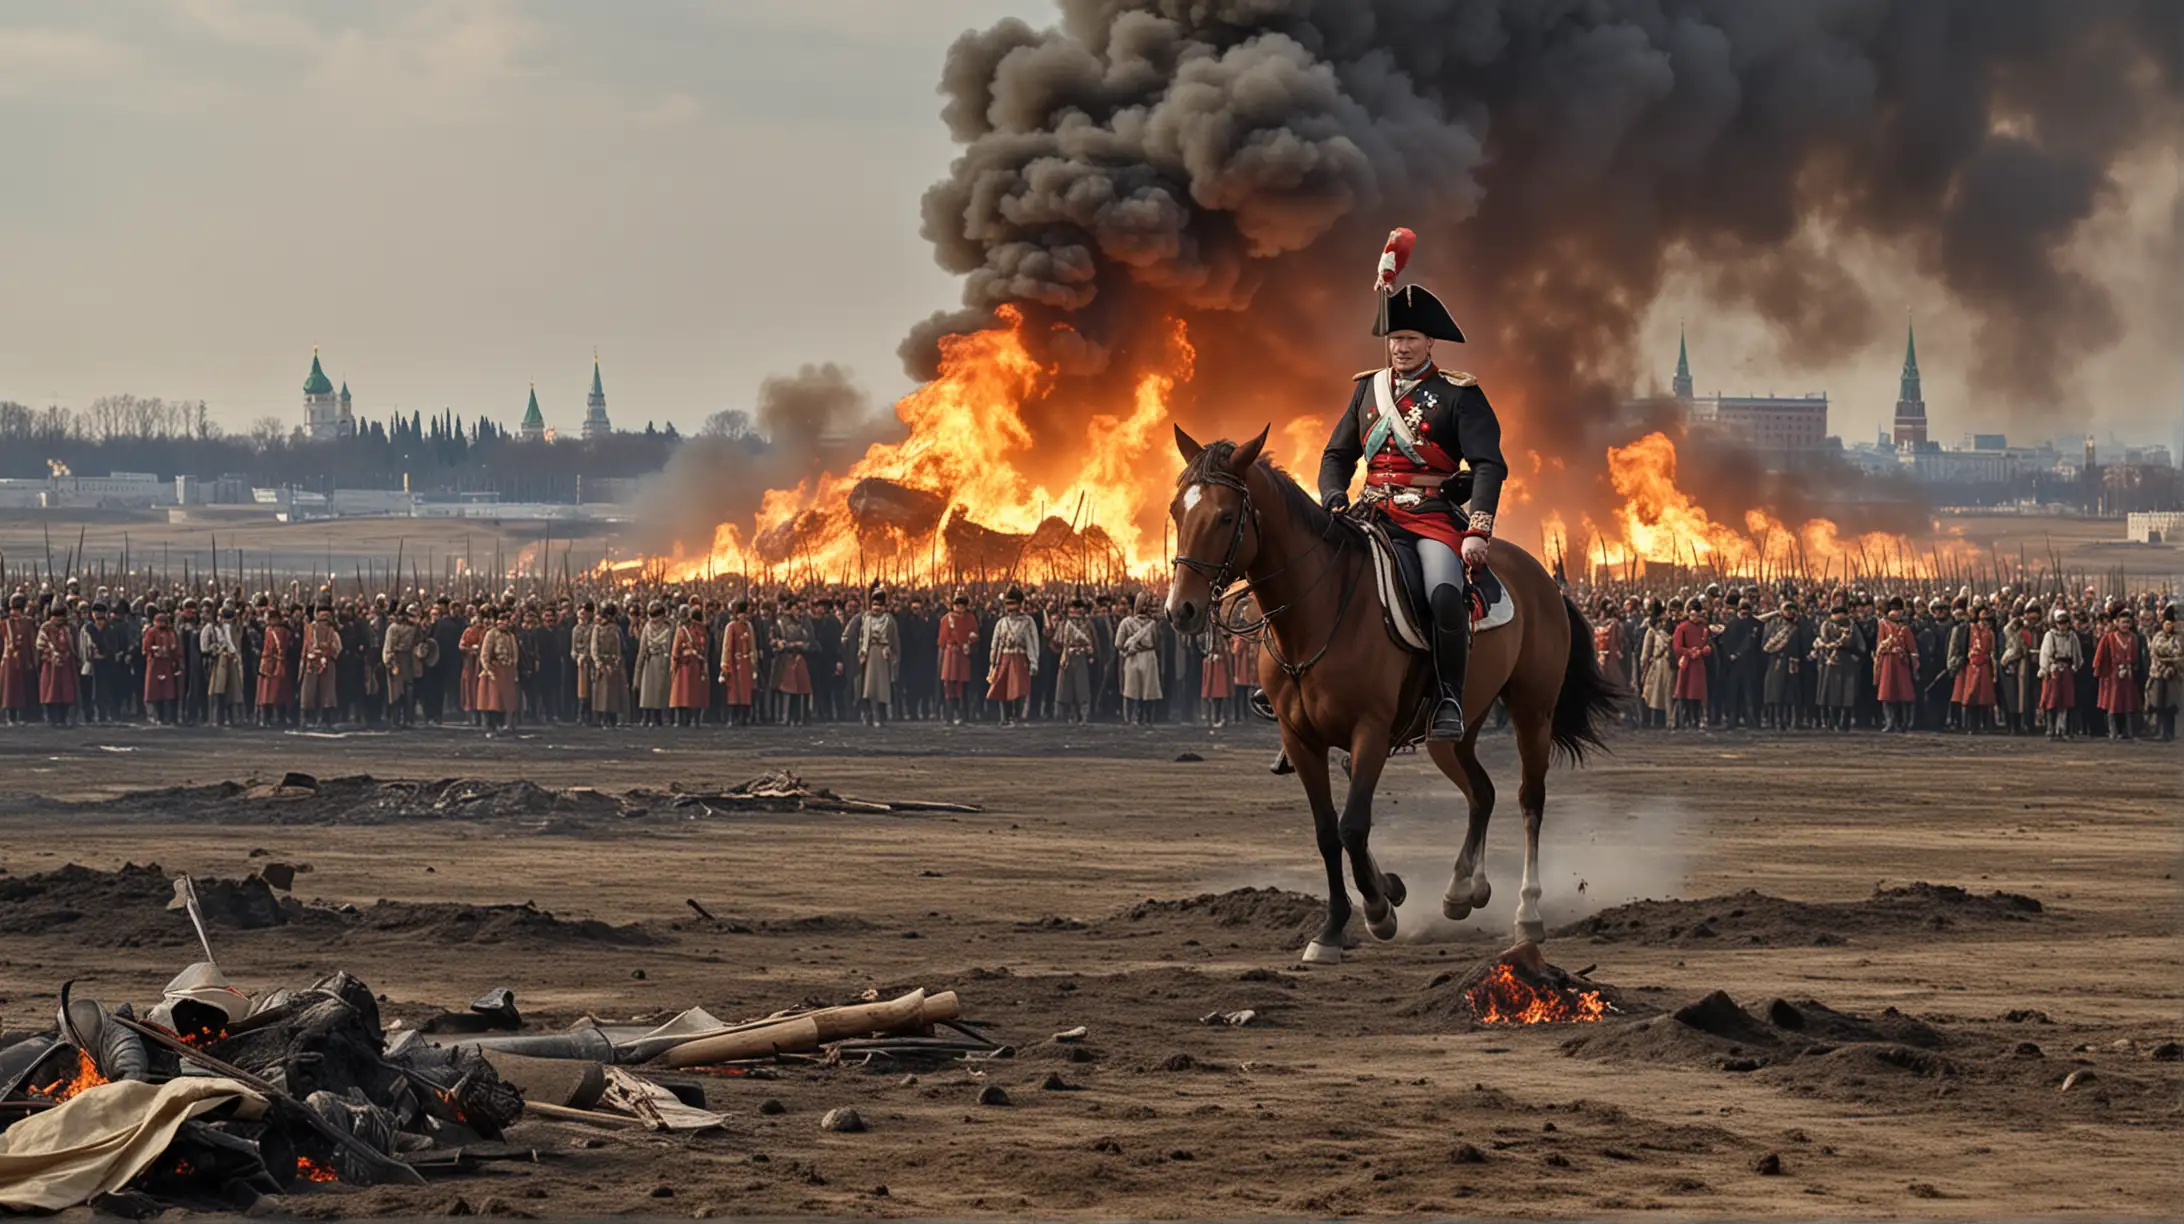 Vladimir Putin Impersonating Napoleons Retreat From Moscow with Kremlin in Flames